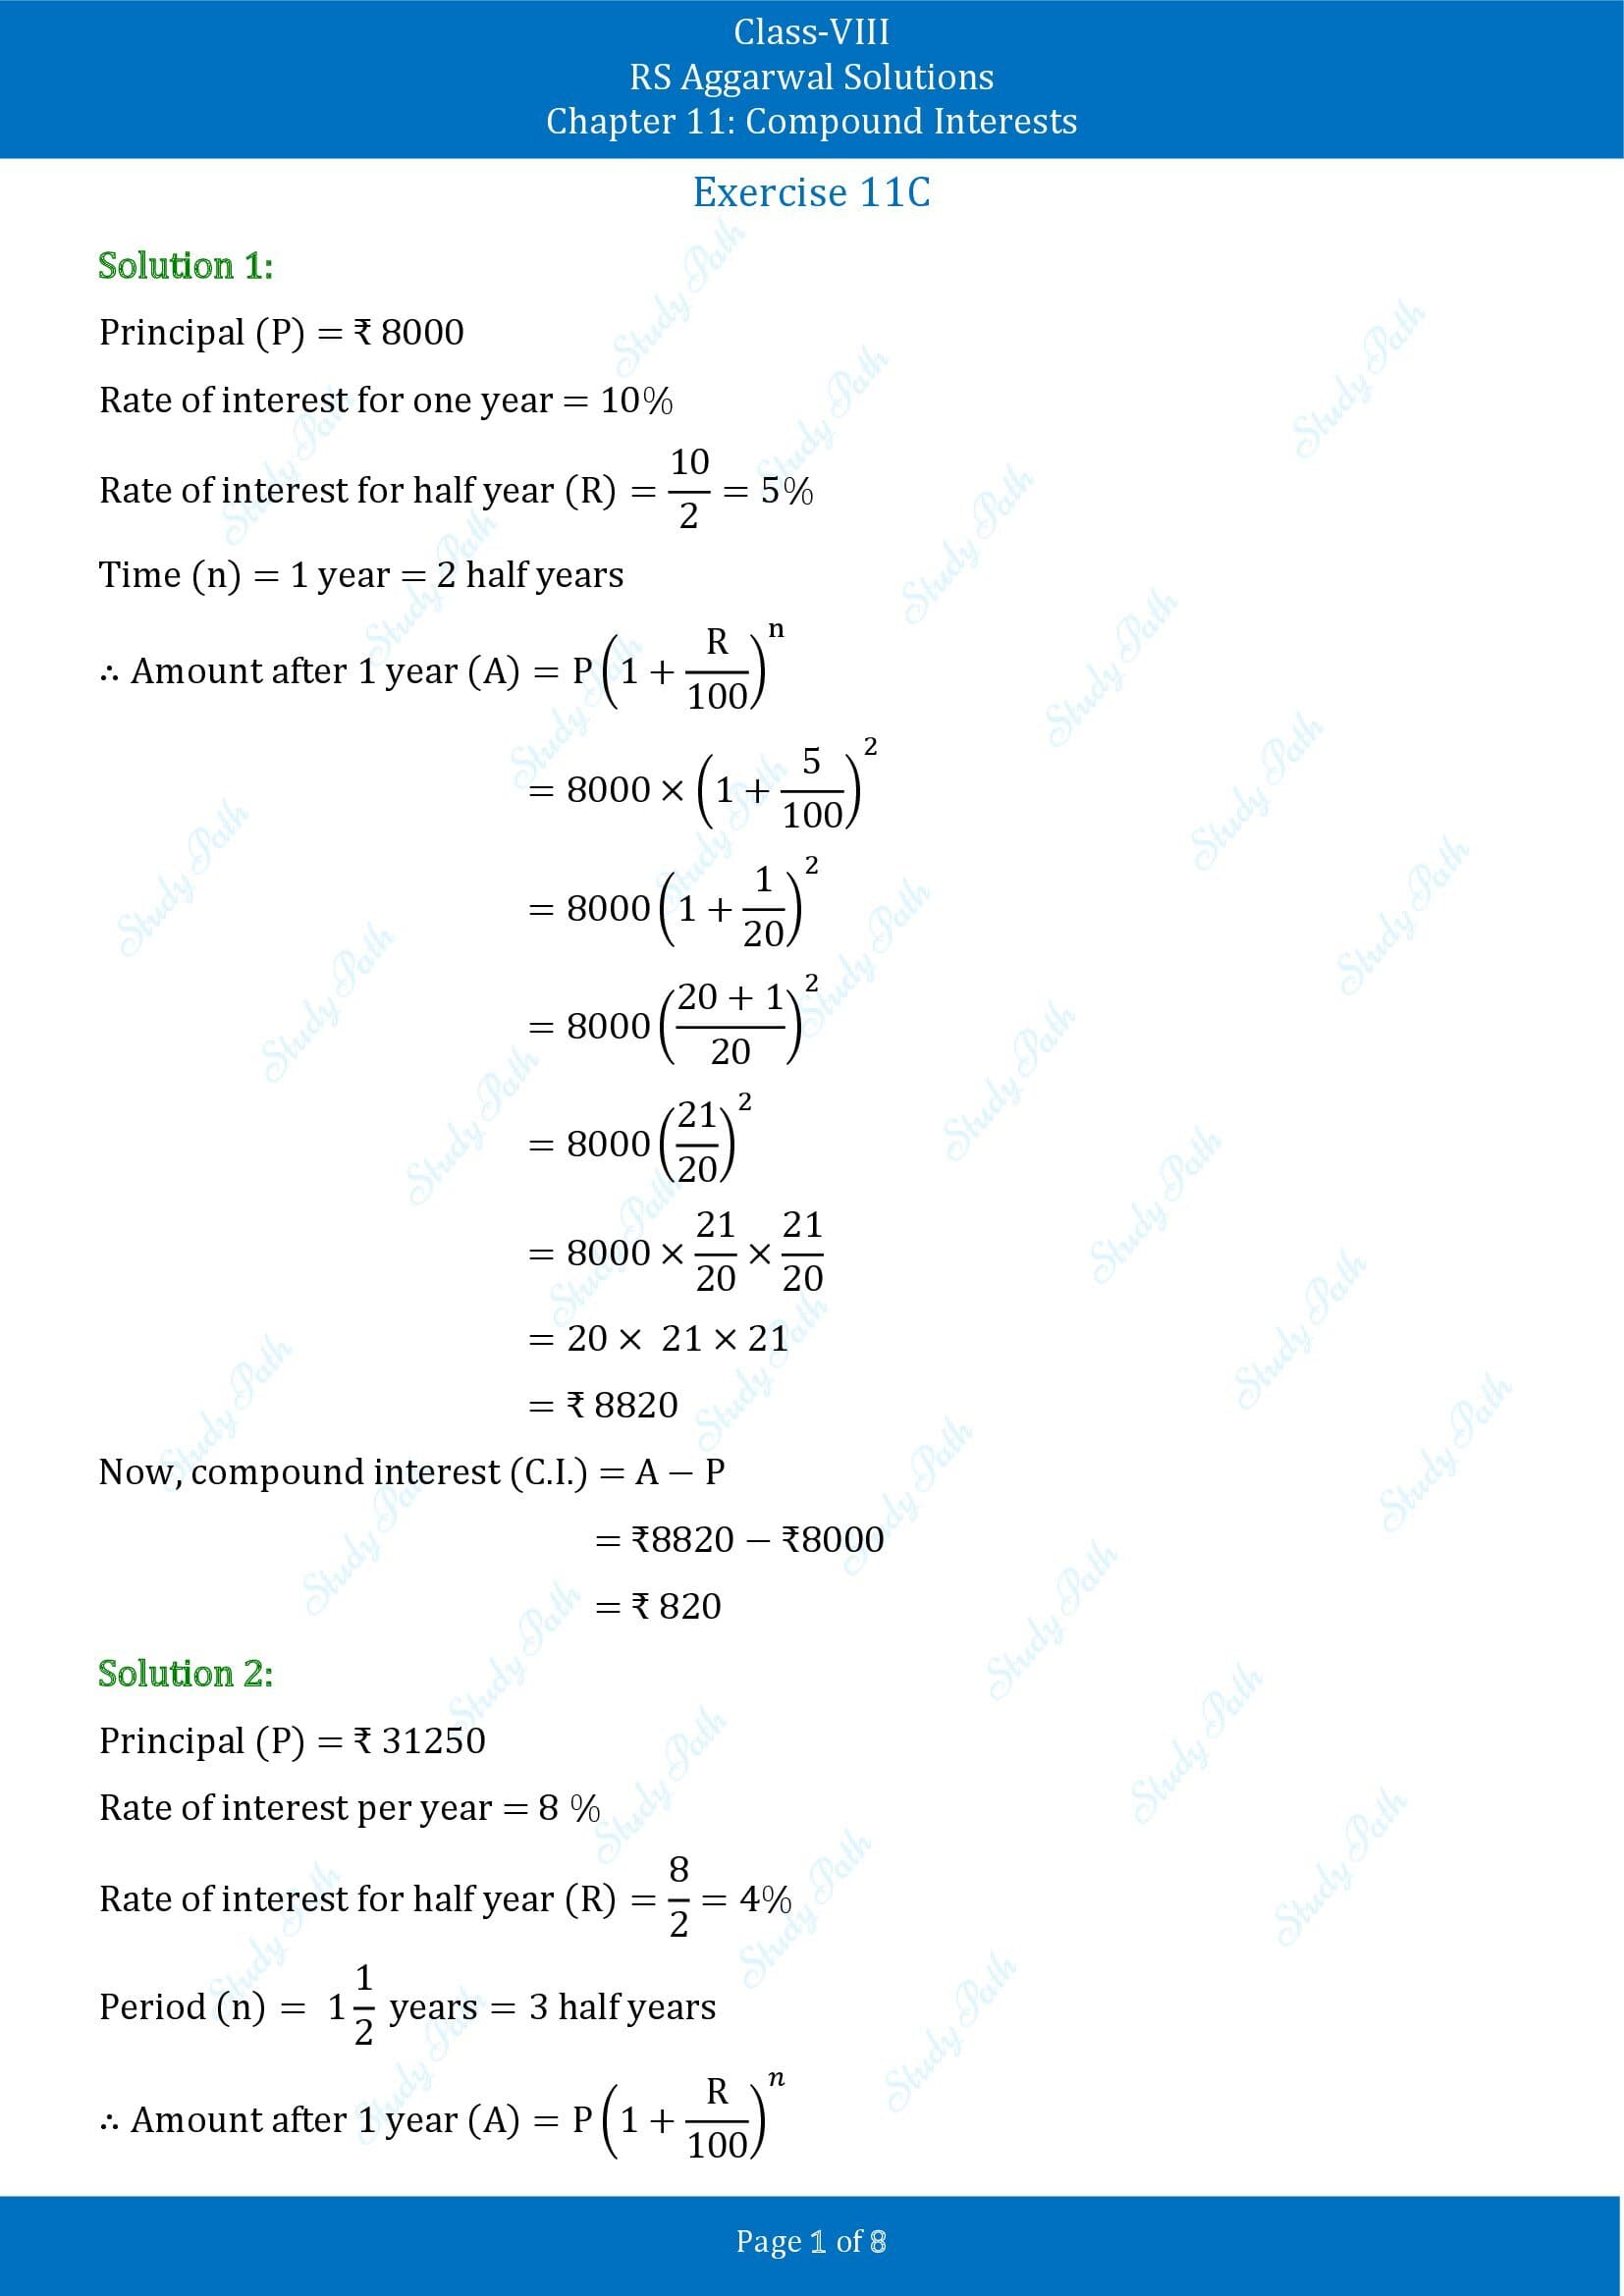 RS Aggarwal Solutions Class 8 Chapter 11 Compound Interests Exercise 11C 001